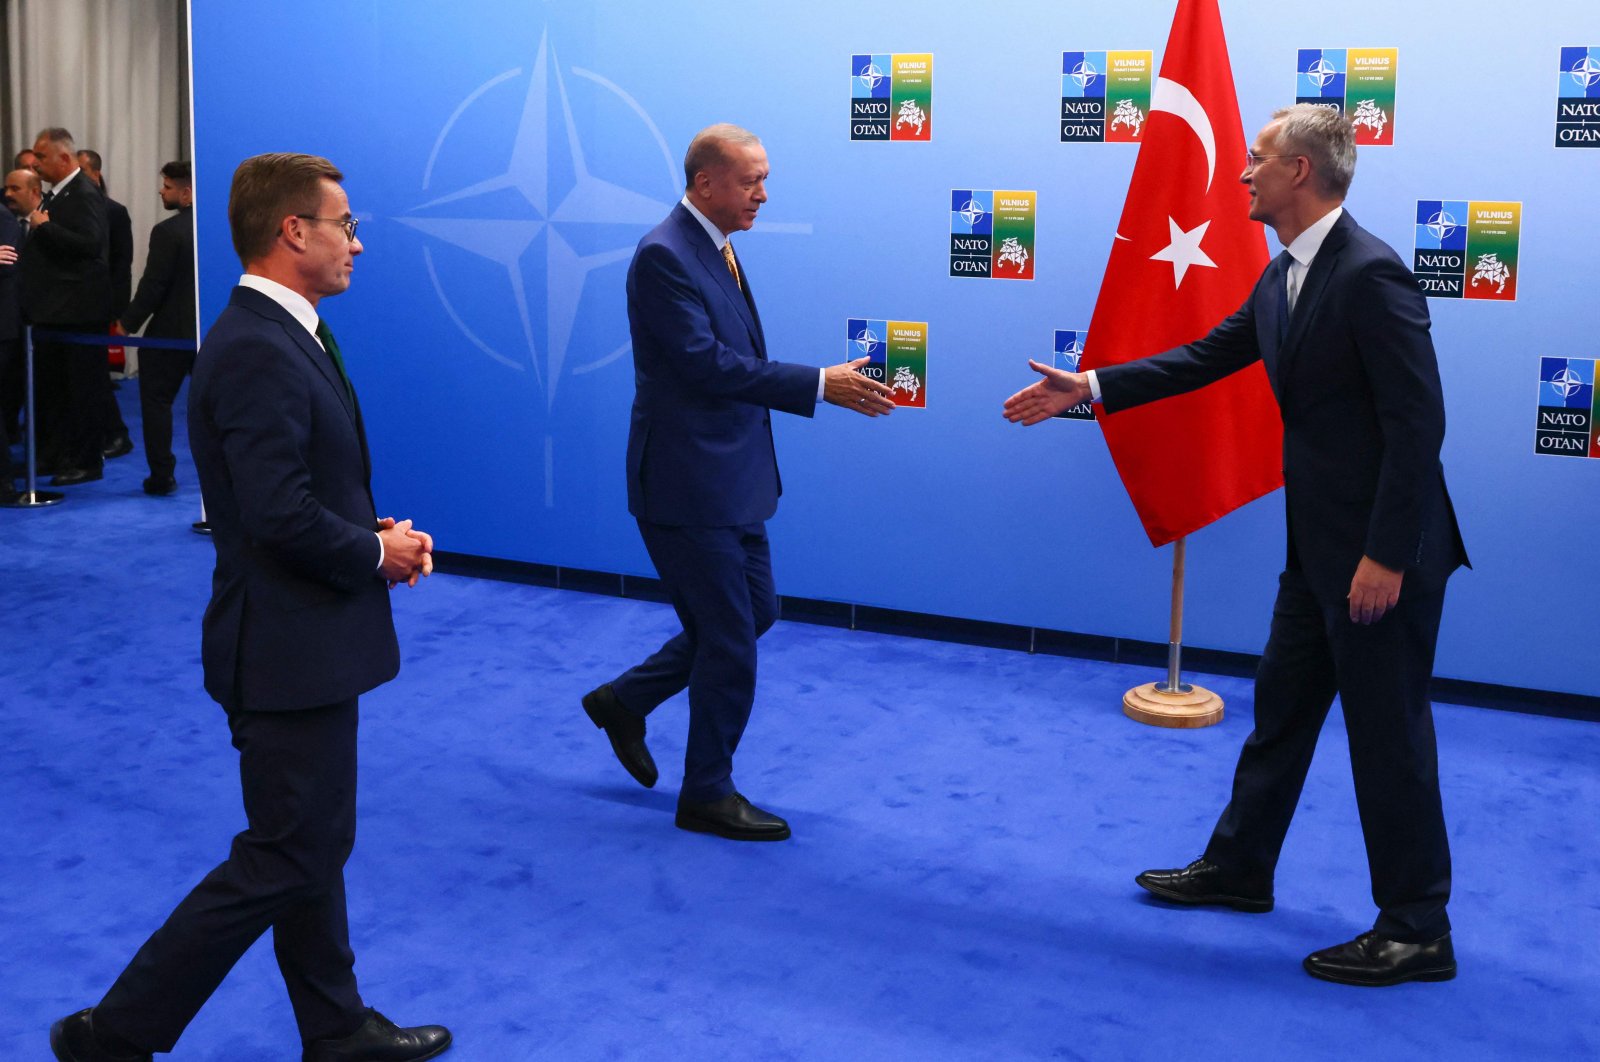 President Recep Tayyip Erdoğan (L) and NATO Secretary-General Jens Stoltenberg (R) shake hands next to Swedish Prime Minister Ulf Kristersson, in Vilnius, Lithuania, July 10, 2023. (AFP Photo)